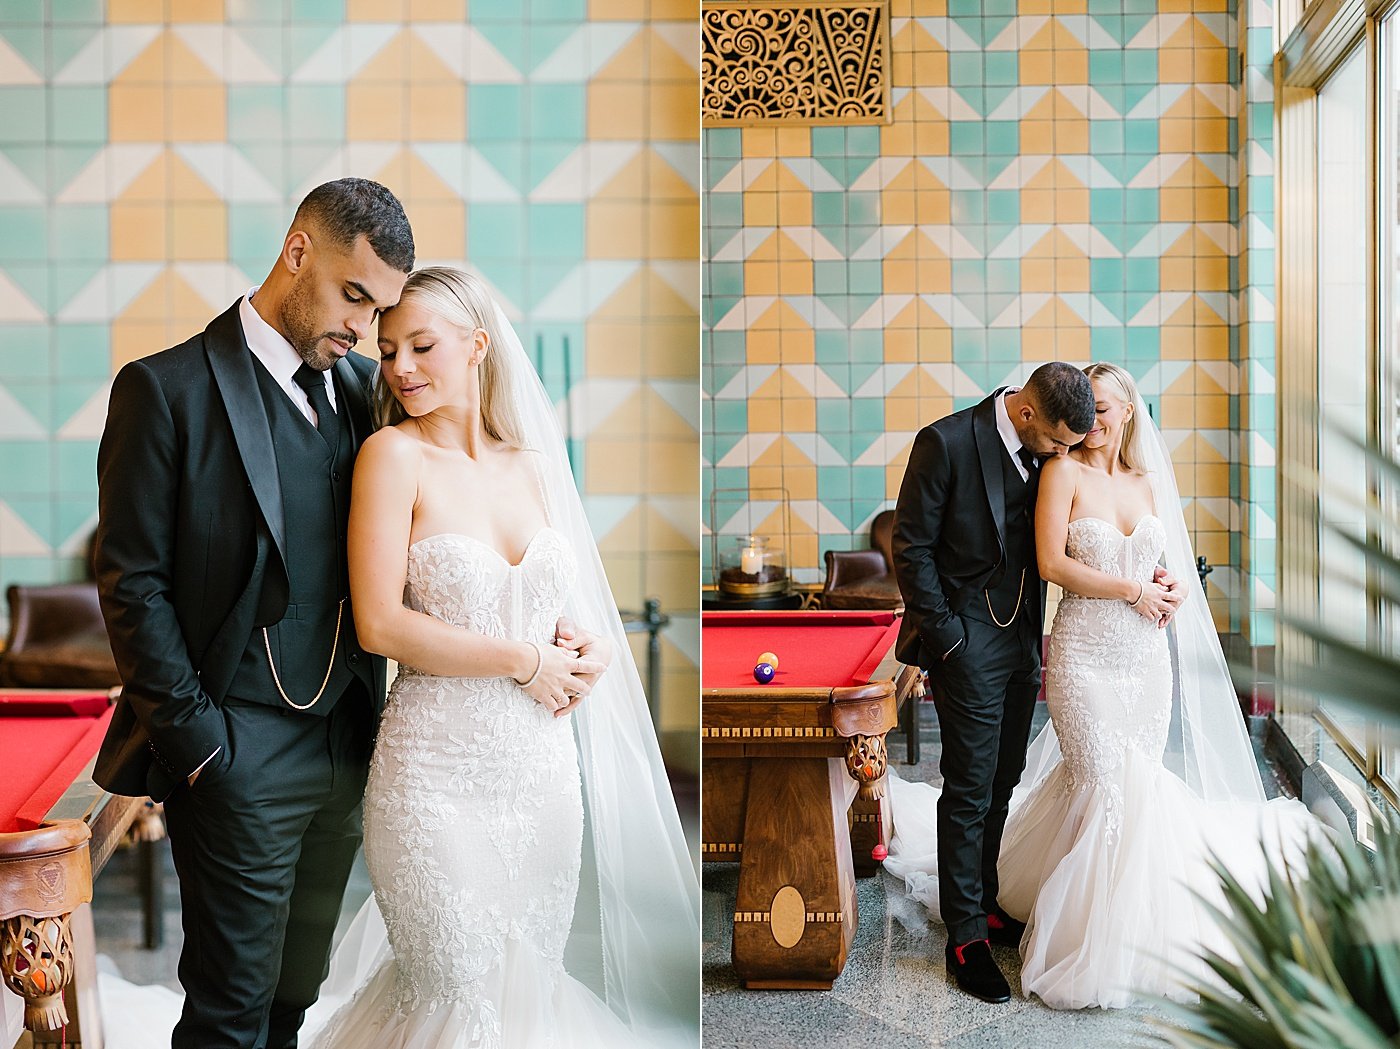 Katie and Micah's Bottleworks Indianapolis Wedding Rebecca Shehorn Photography55.jpg